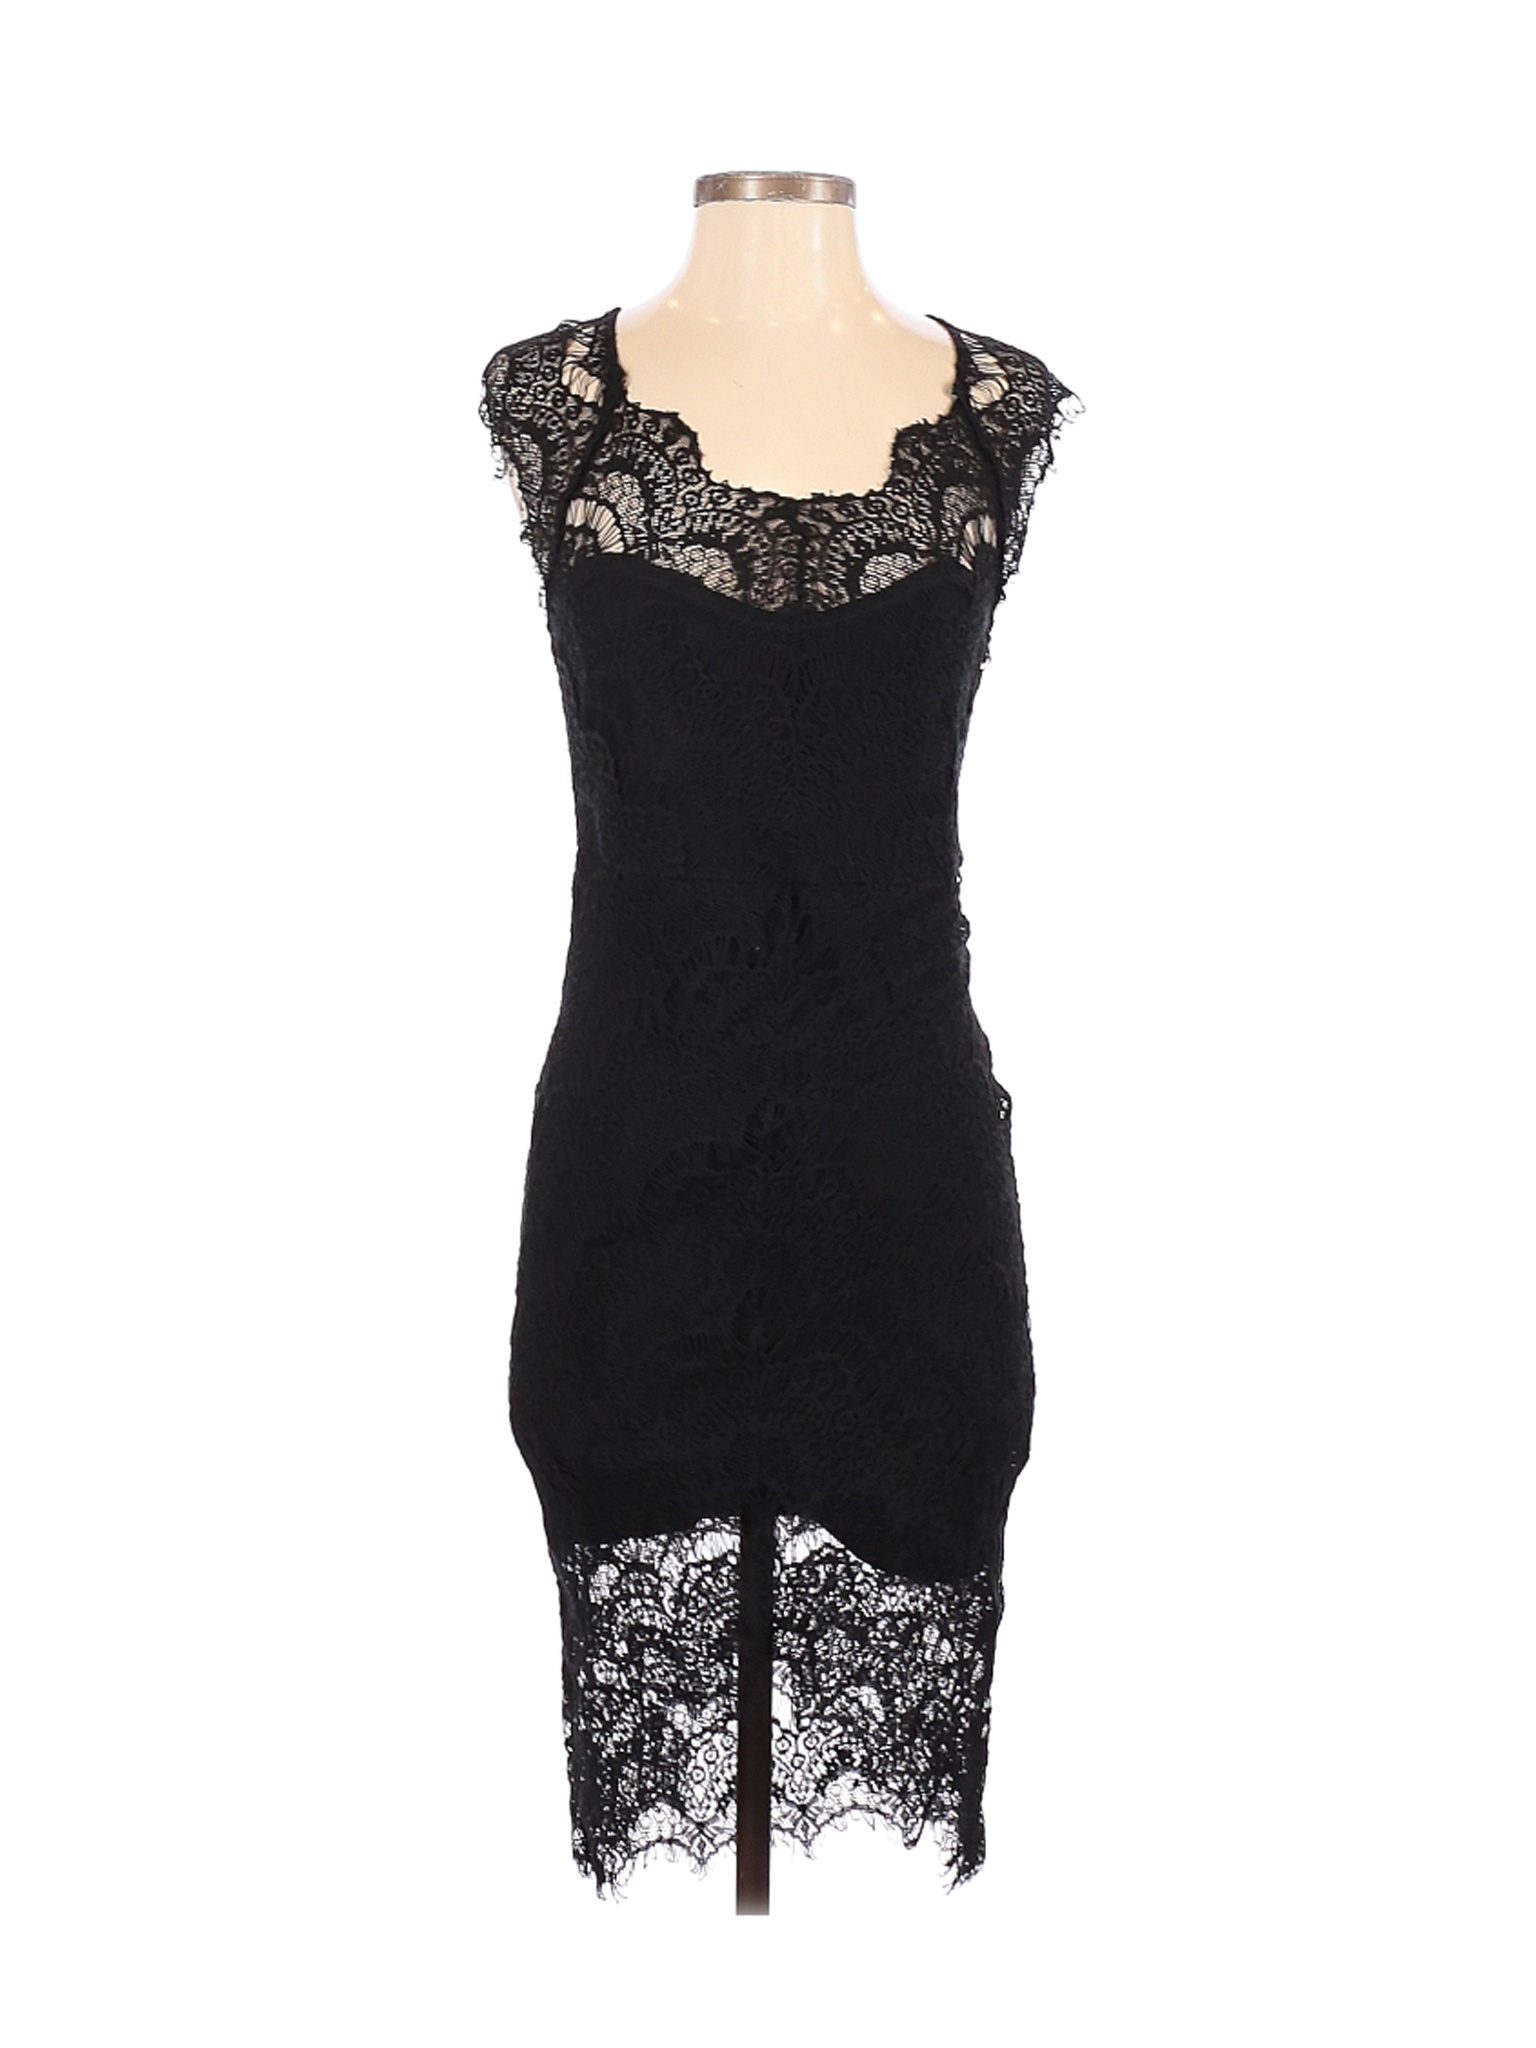 Intimately by Free People Women Black Cocktail Dress S | eBay